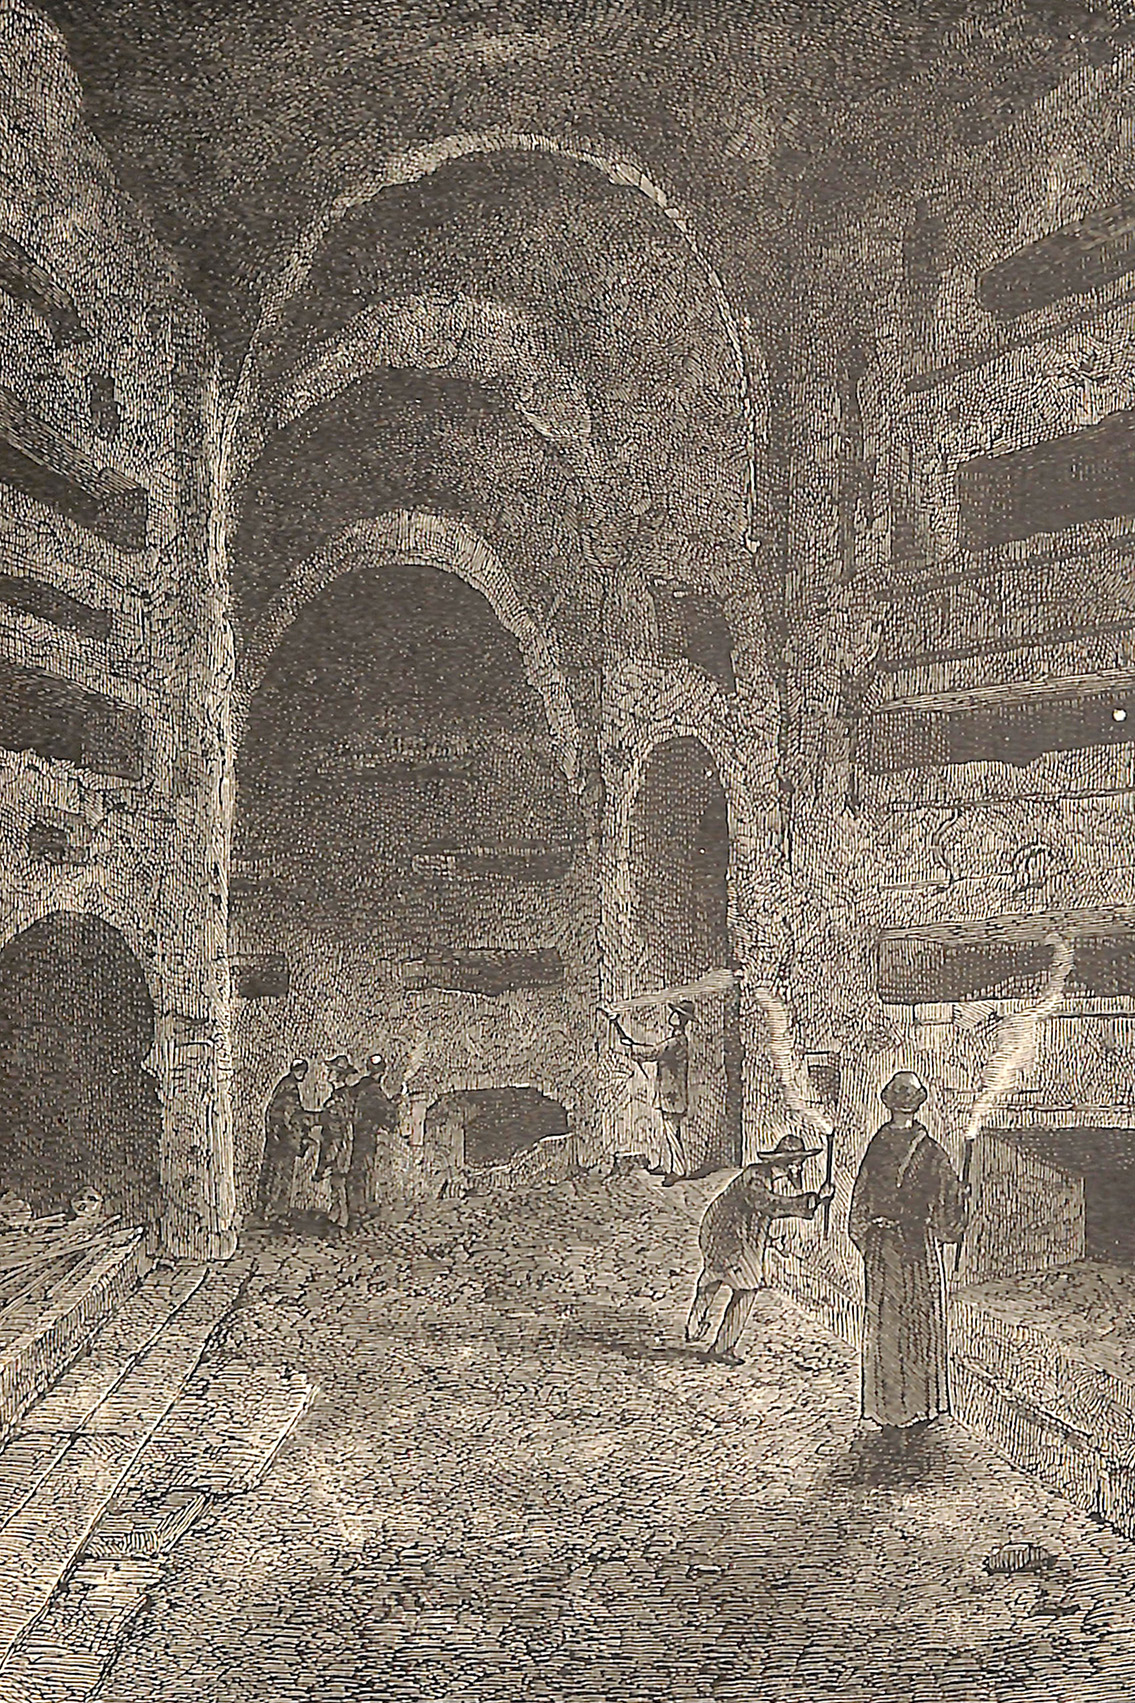 Inside view of Catacombs